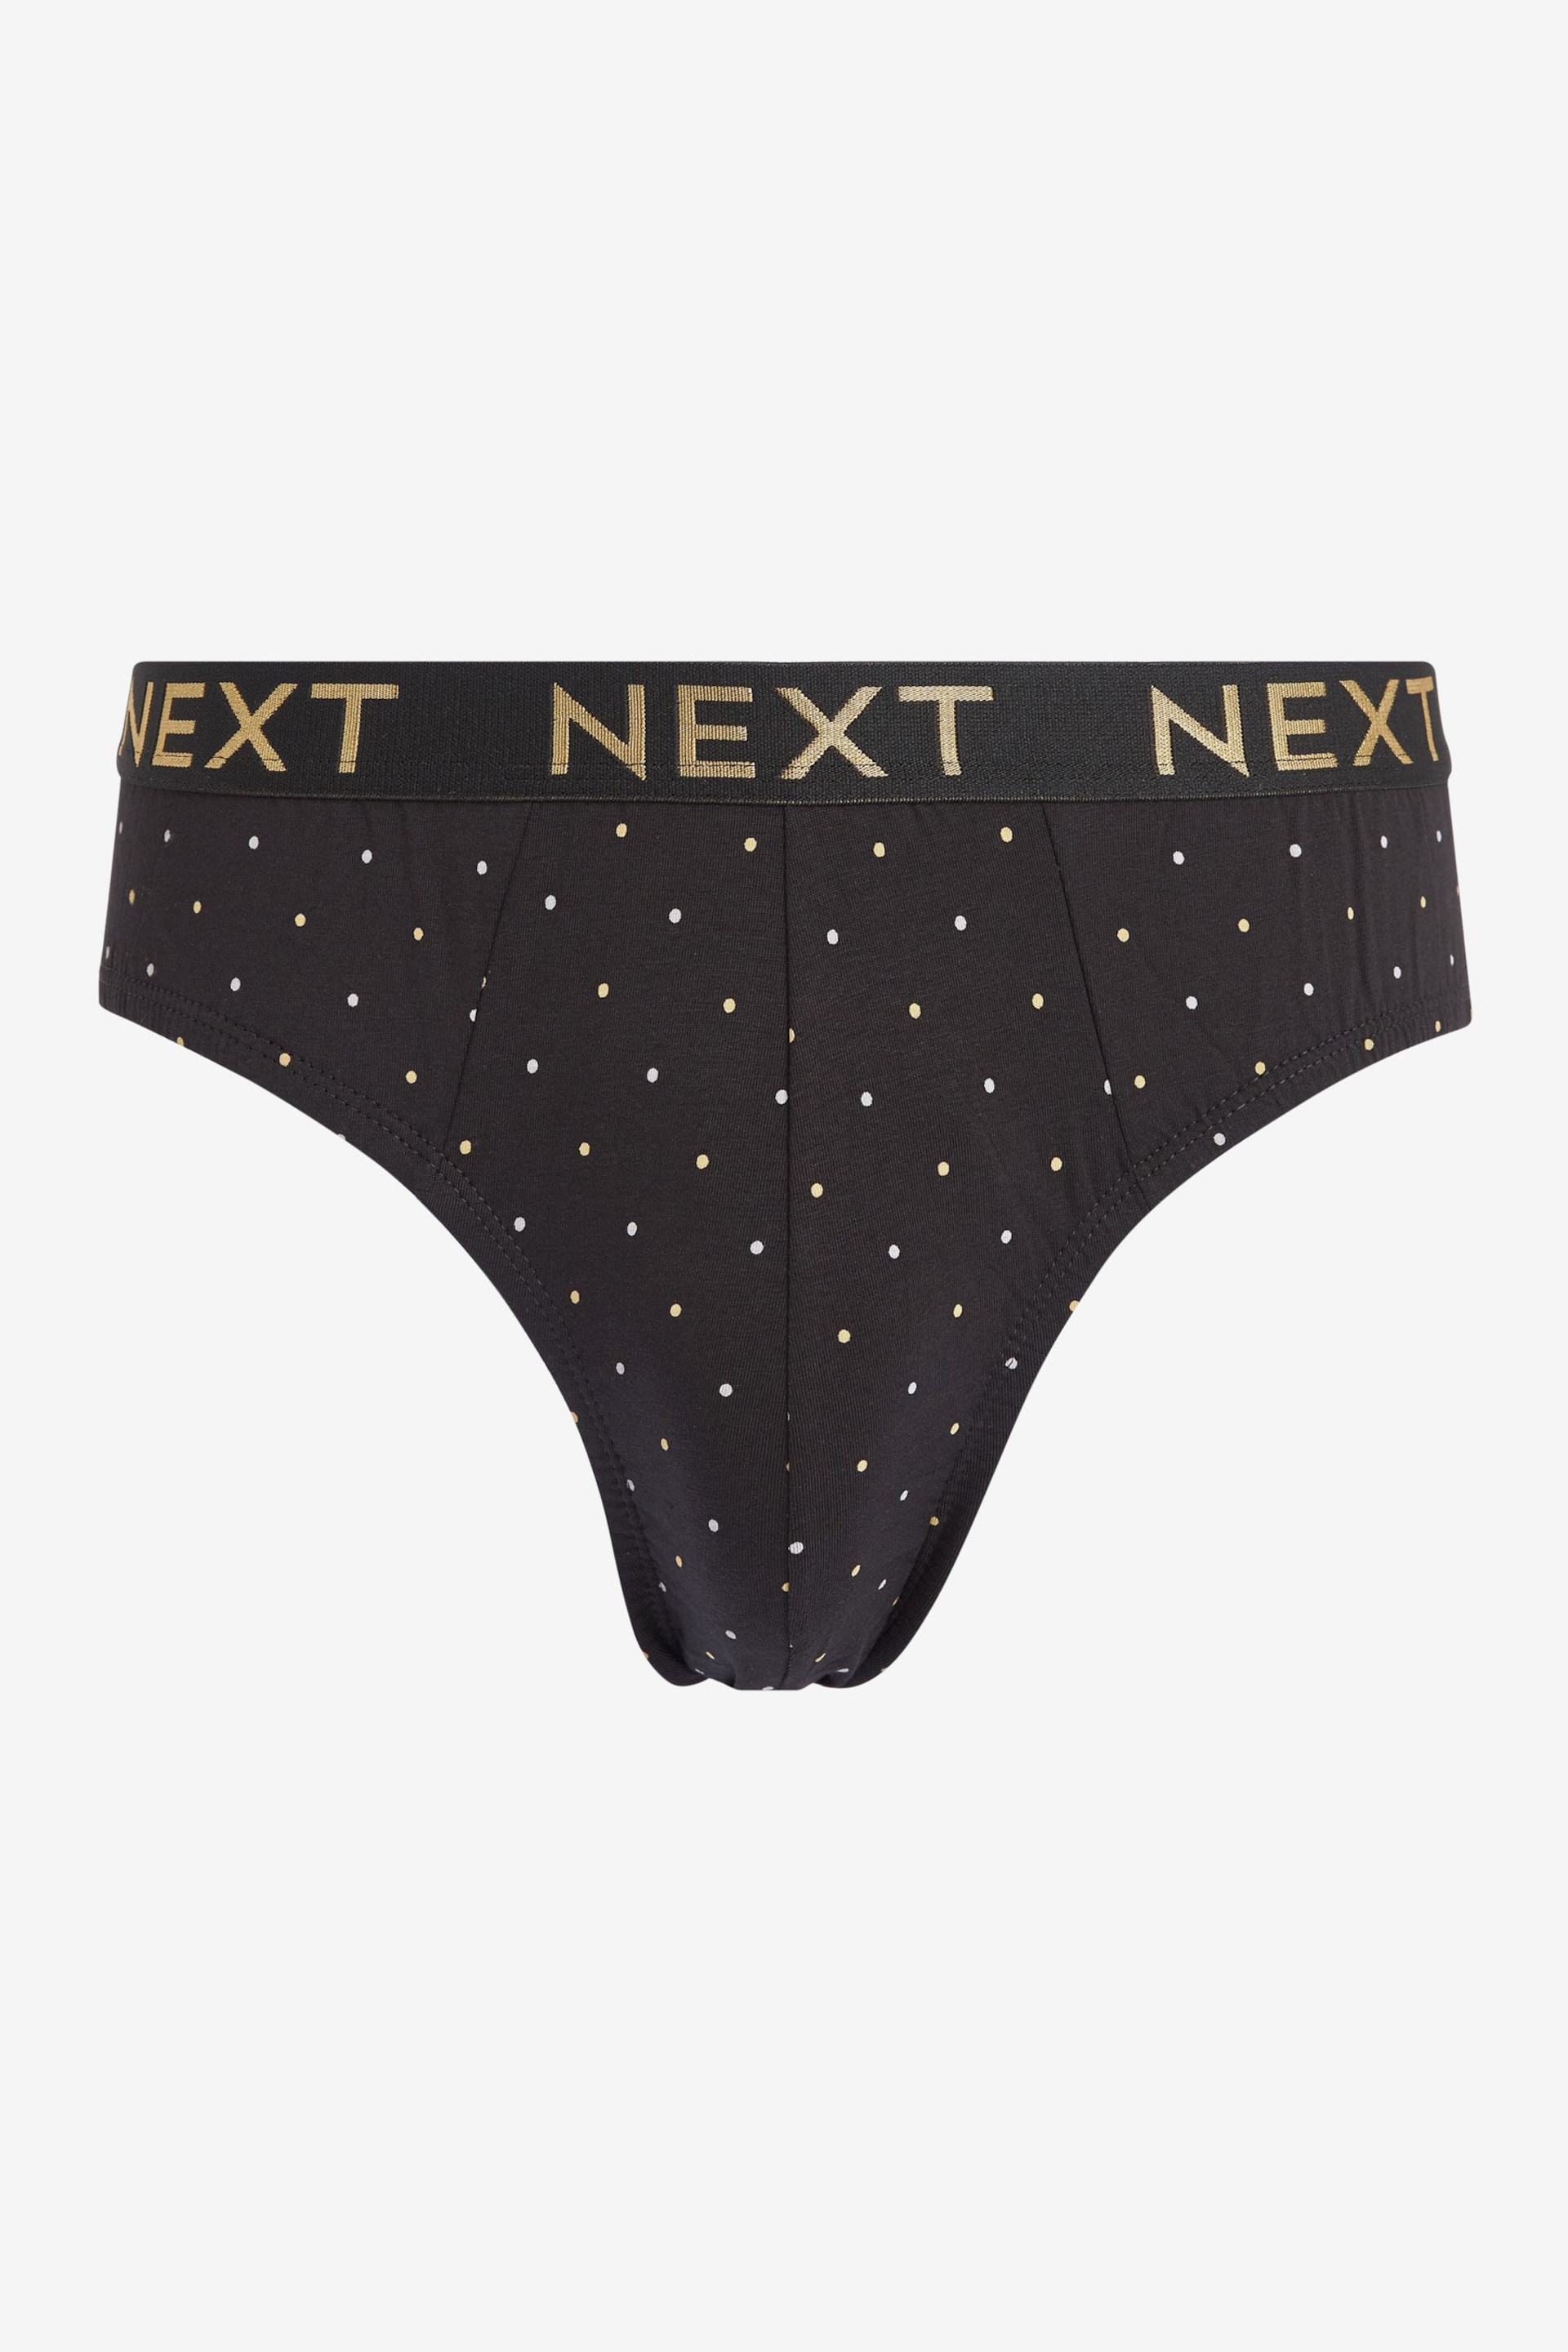 Black Gold Pattern 4 pack Cotton Rich Briefs - Image 7 of 10